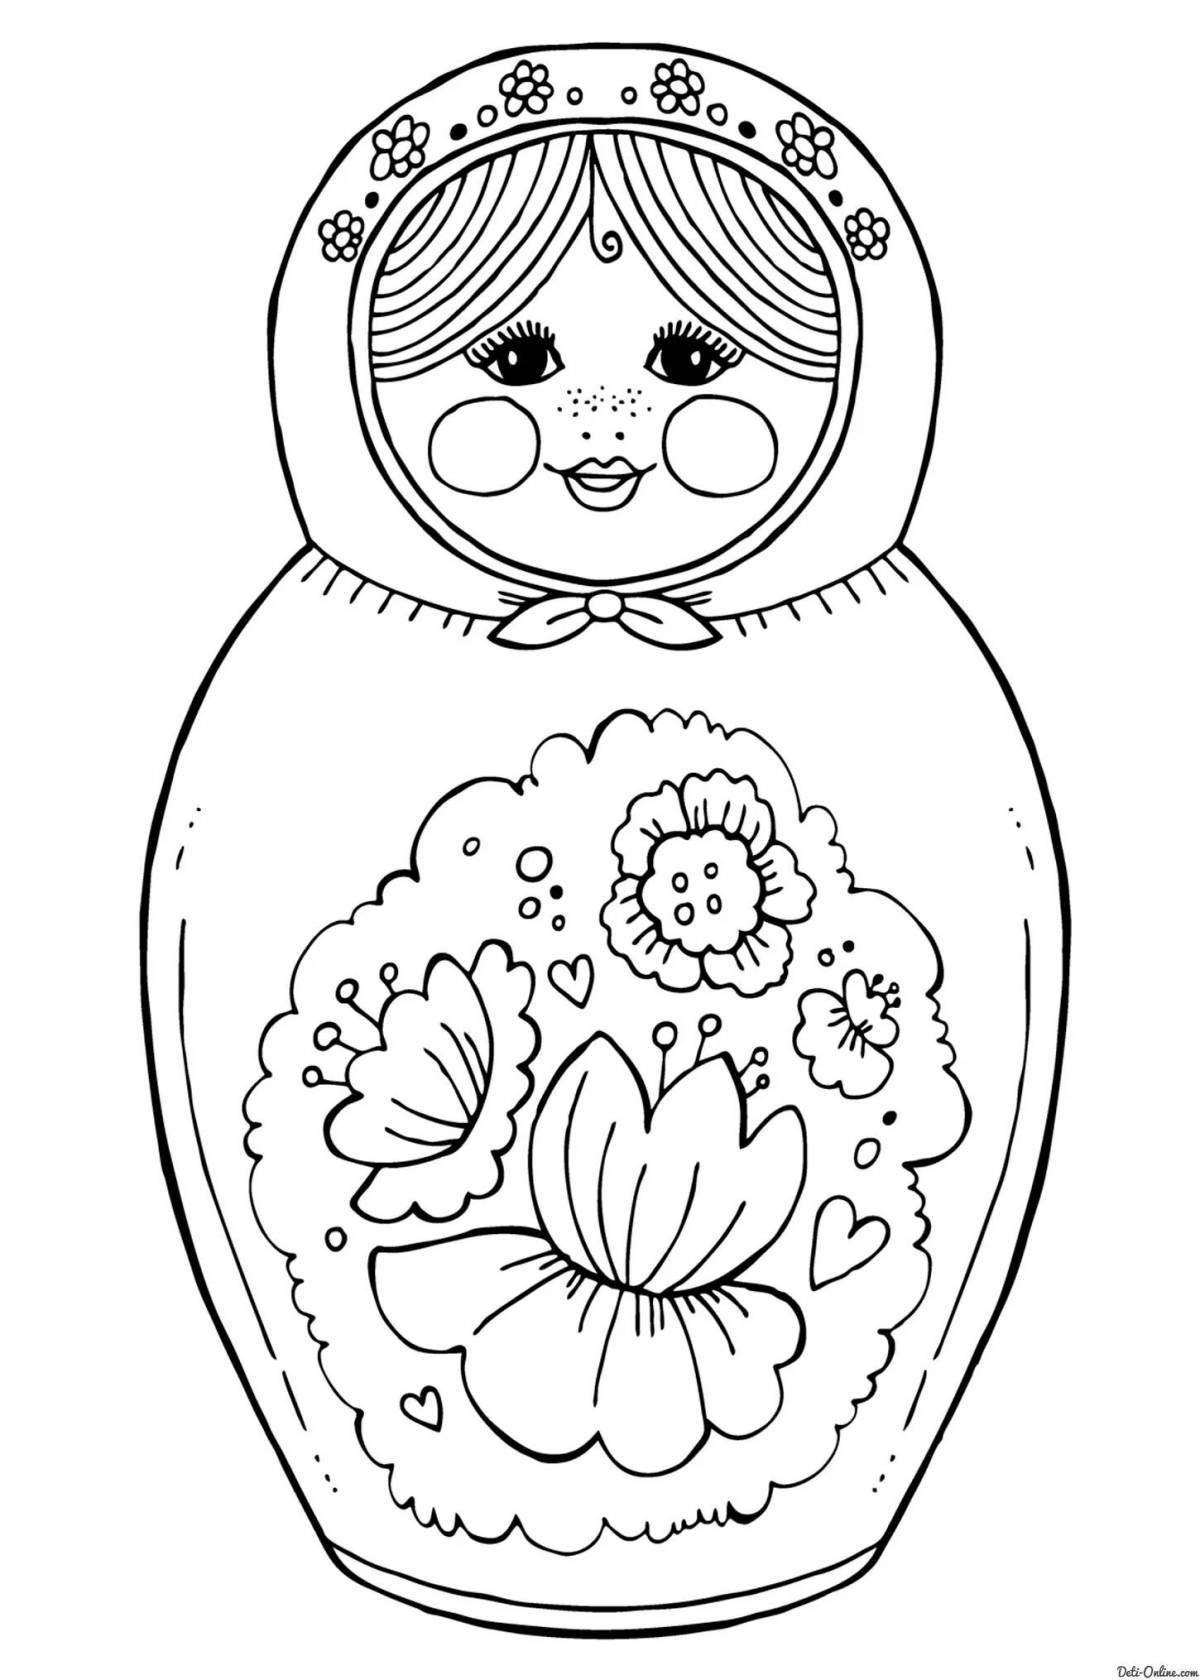 Bright russia coloring book for kids